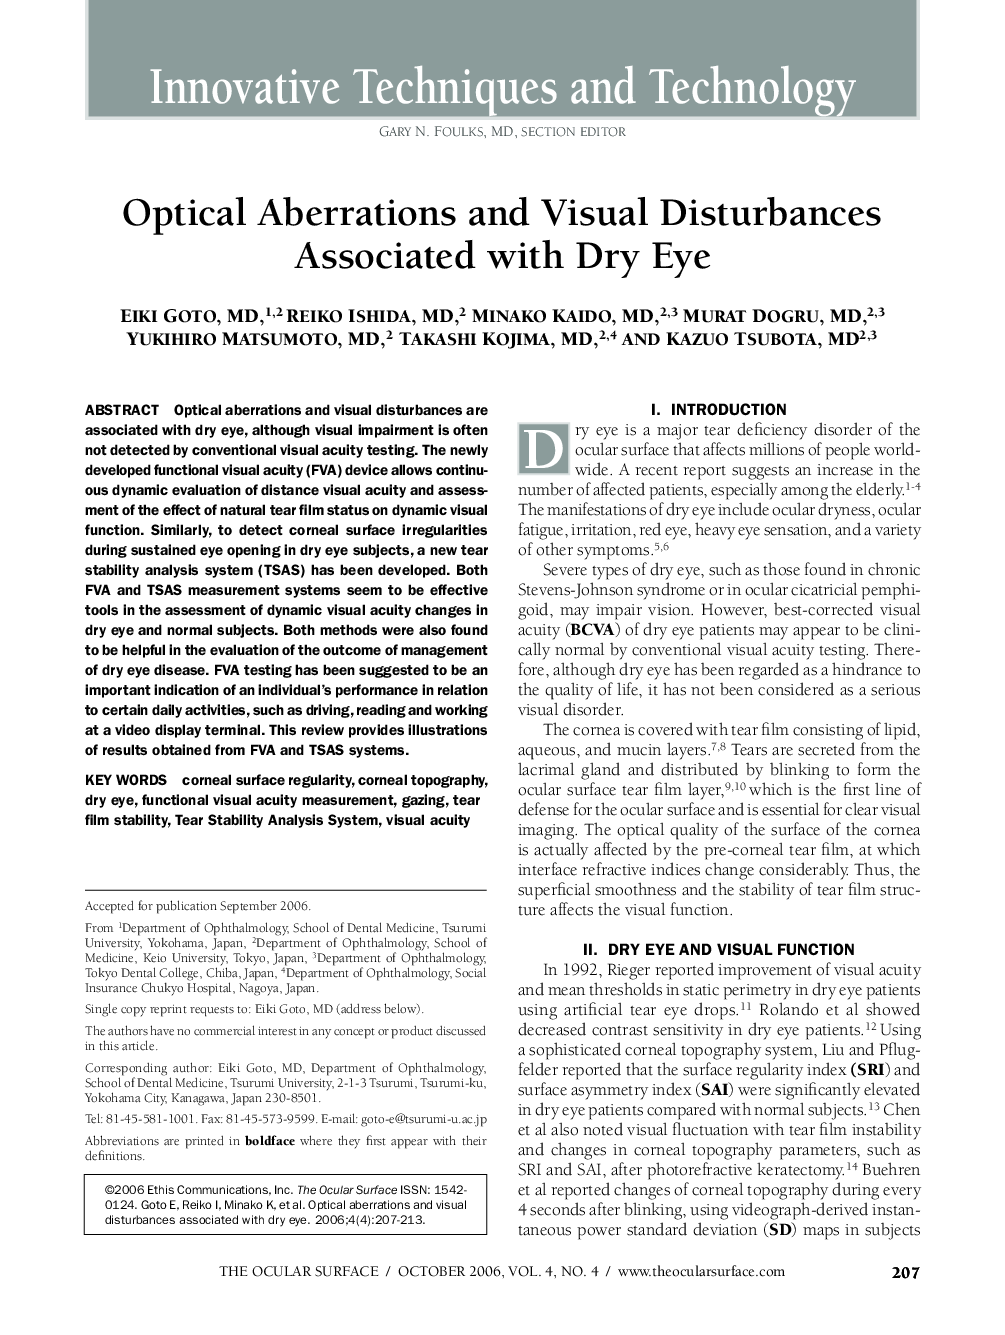 Optical Aberrations and Visual Disturbances Associated with Dry Eye 